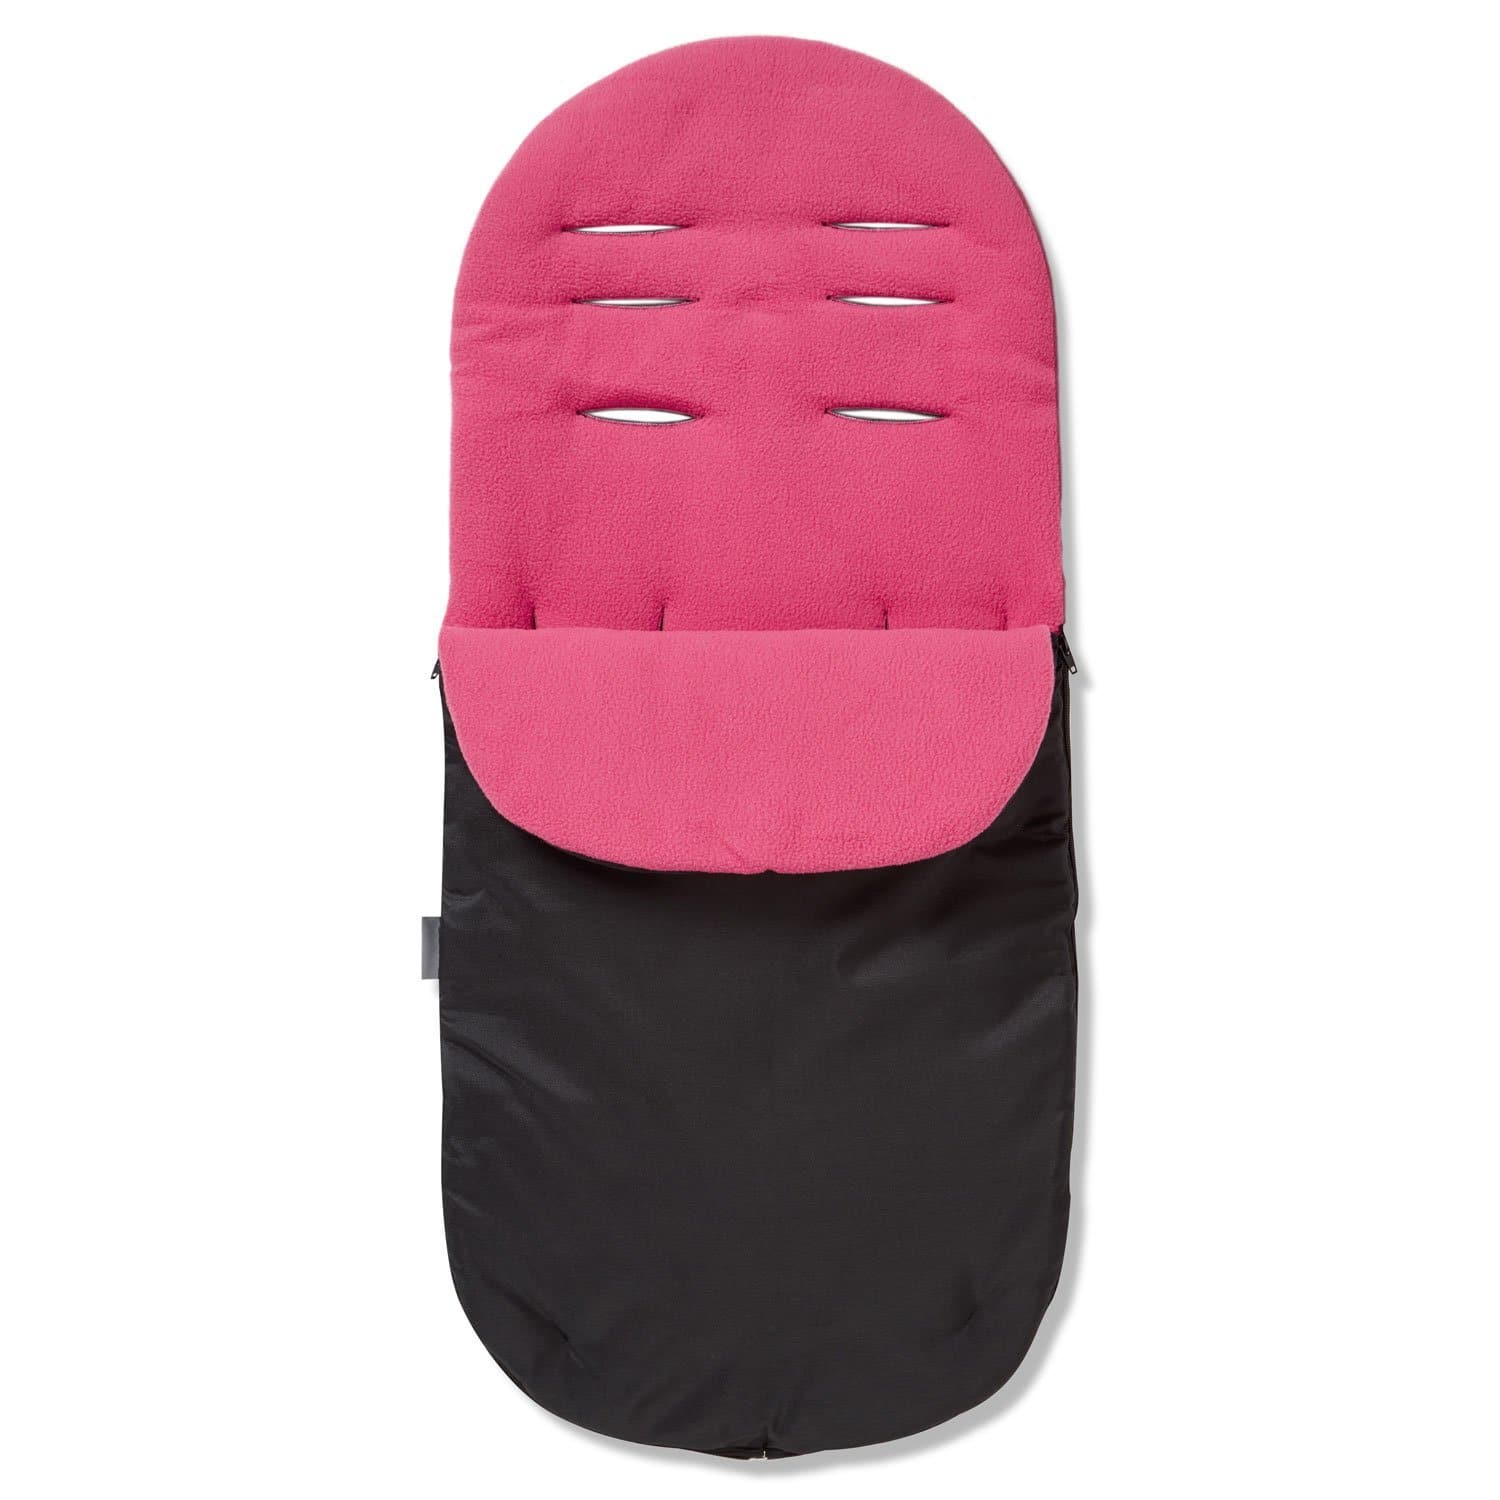 Footmuff / Cosy Toes Compatible with Obaby - Dark Pink / Fits All Models | For Your Little One